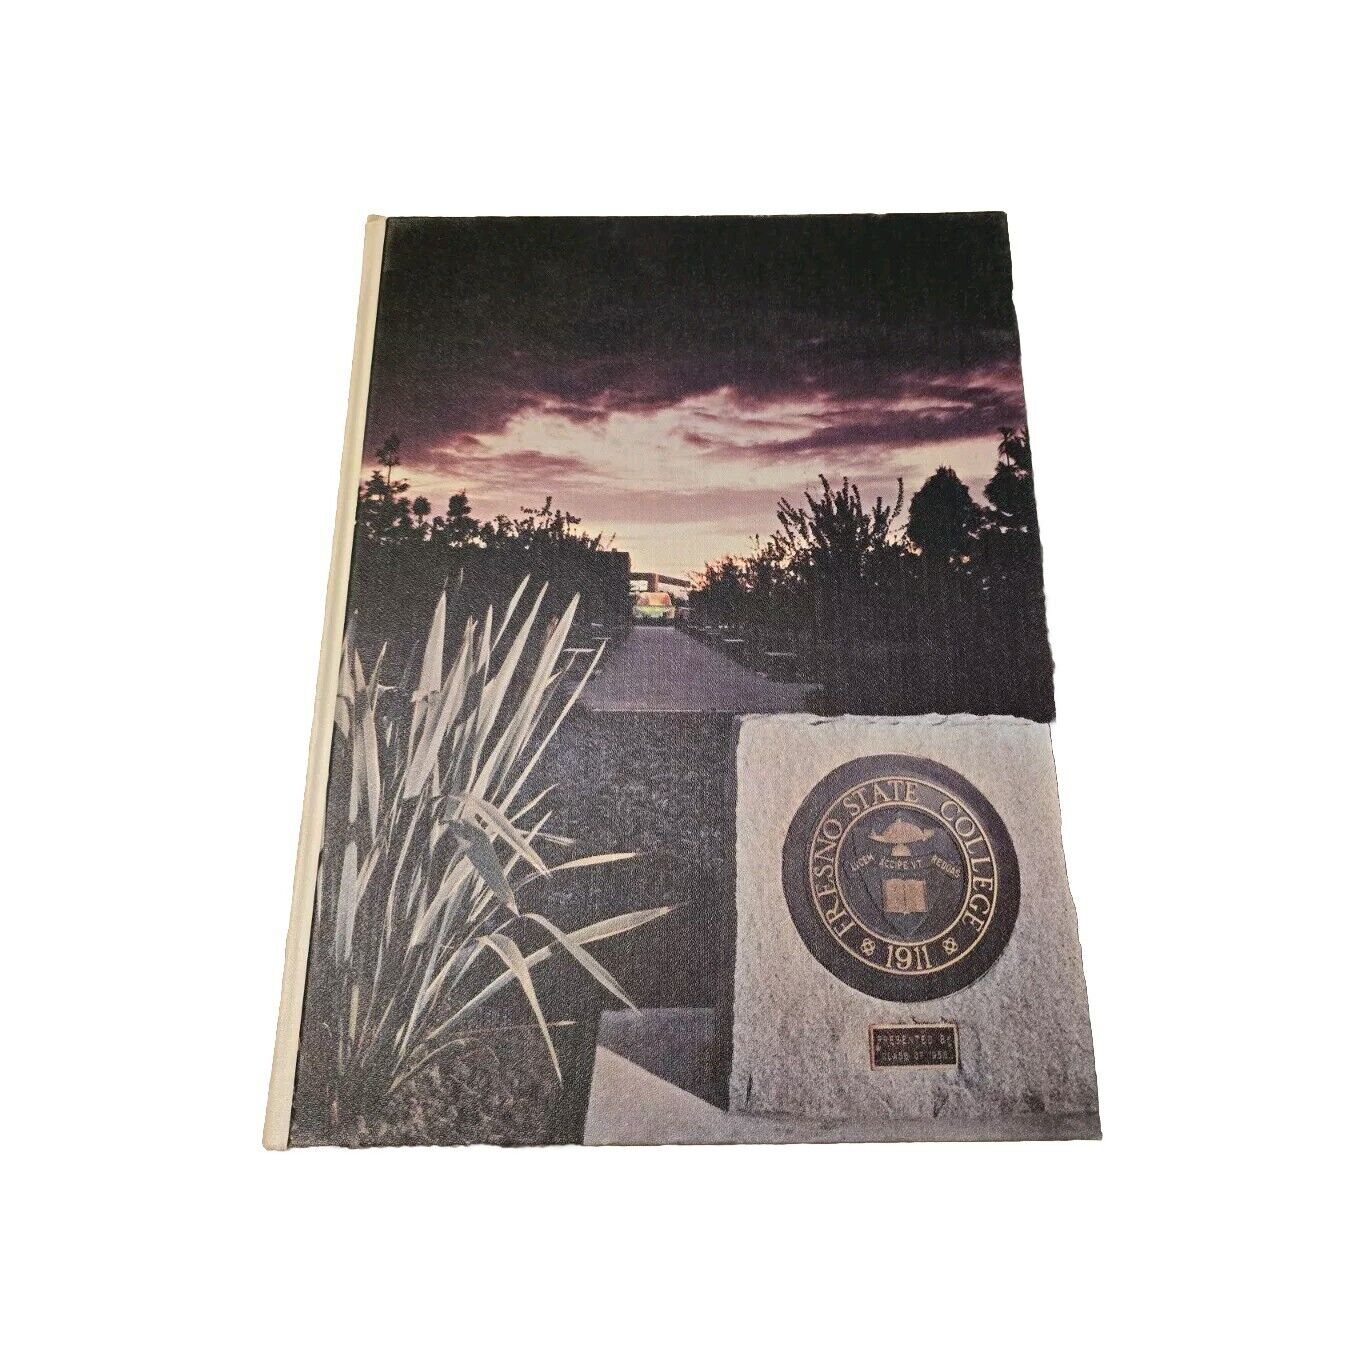 Vintage 1964 Fresno State College California Yearbook 